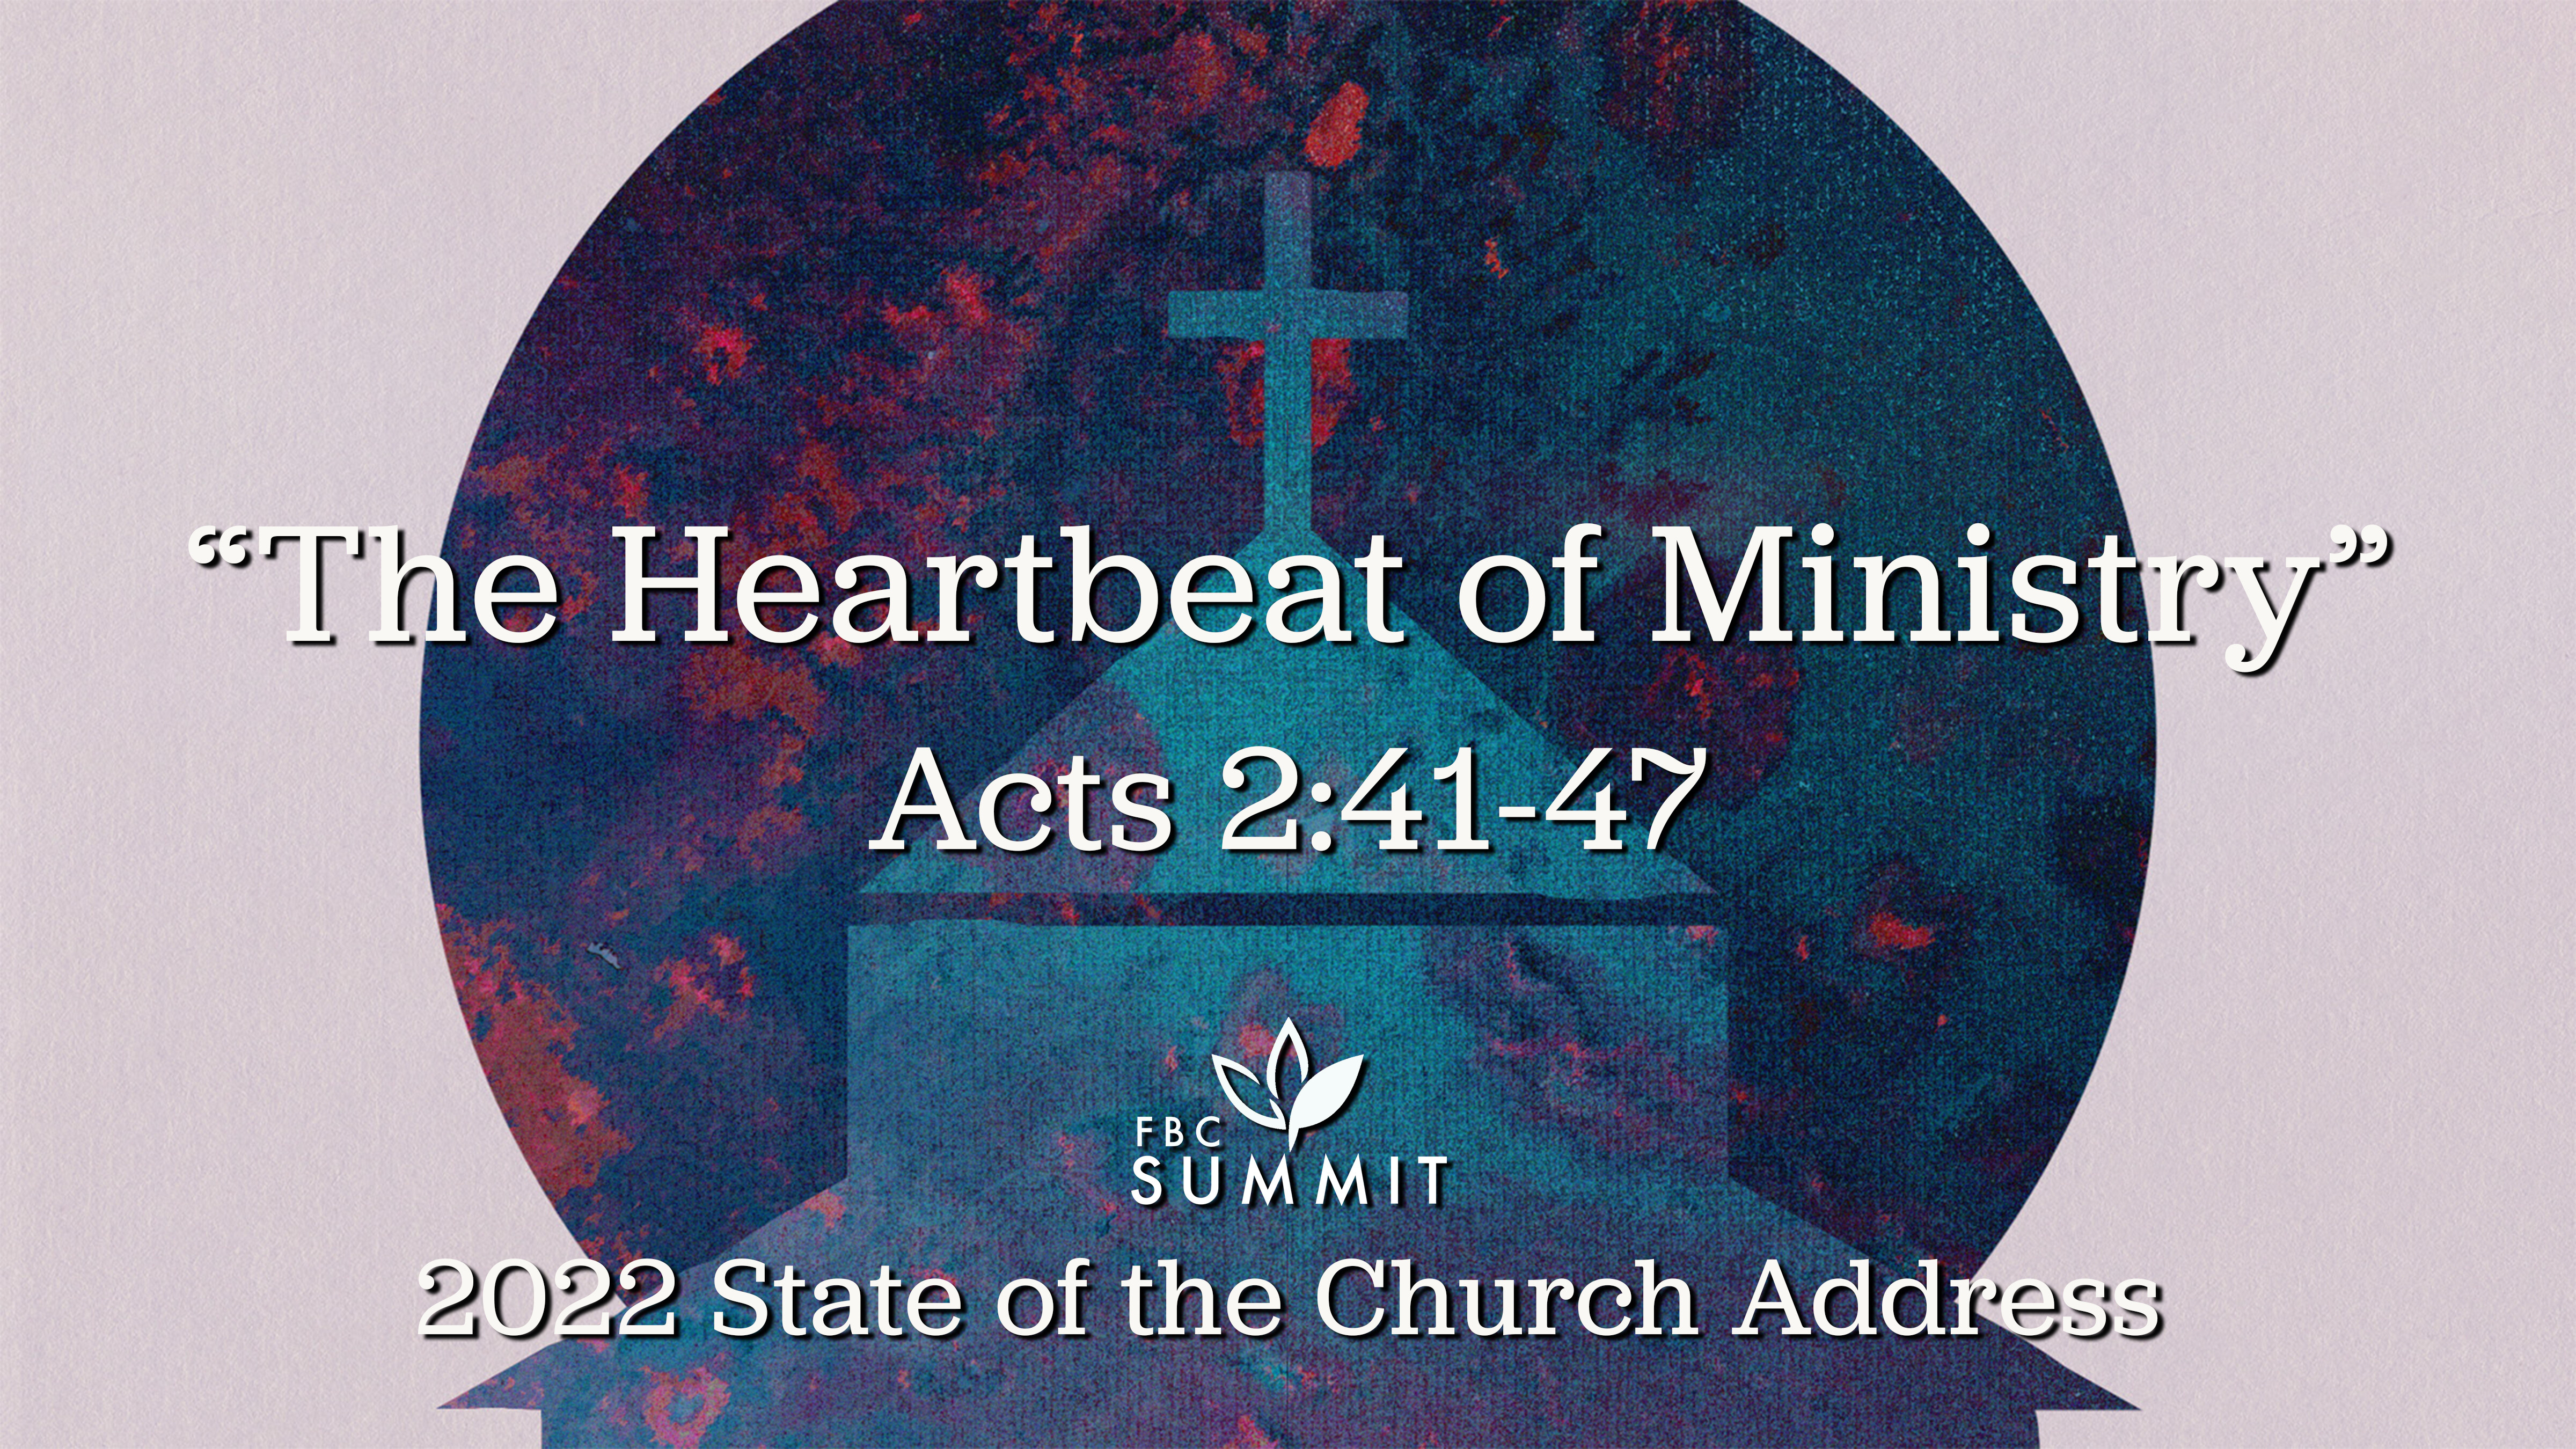 2022 State of the Church Address: "The Heartbeat of Ministry" Acts 2:41-47 // Dr. Larry LeBlanc